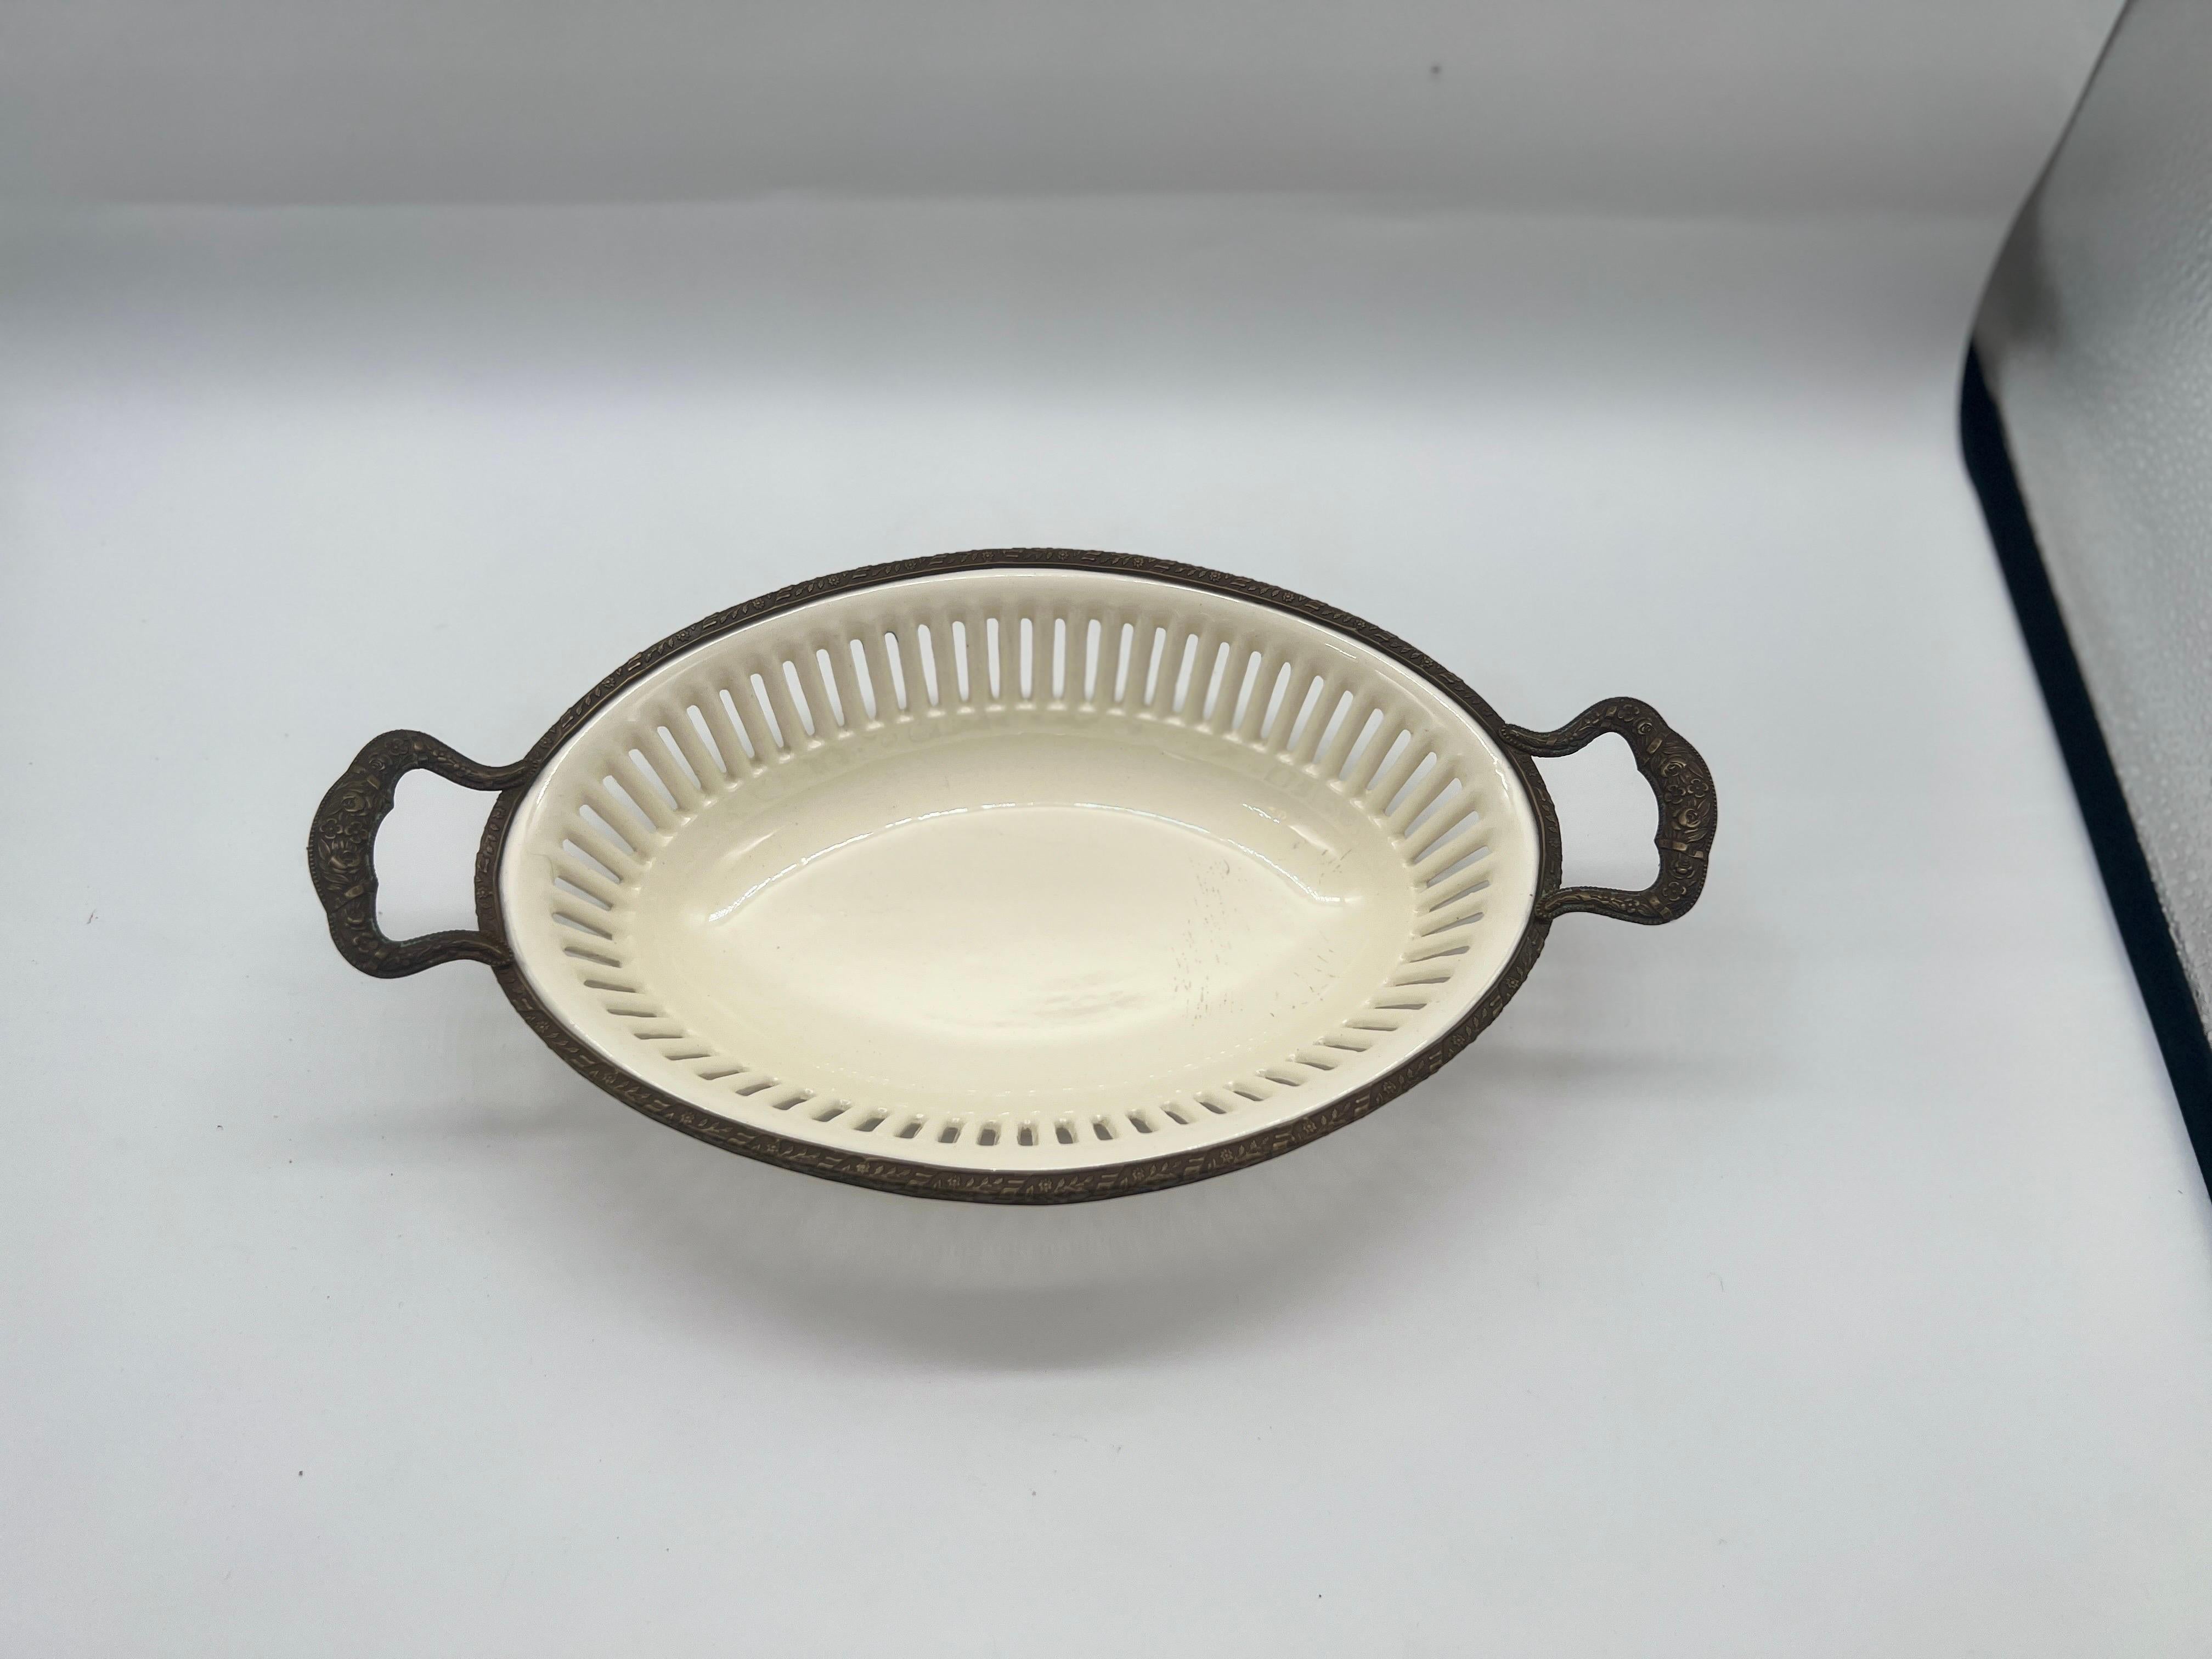 Continental, 20th century.
A traditional creamware basket with pierced body. The bowl is mounted with an engraved ormolu mount. Marked to underside.